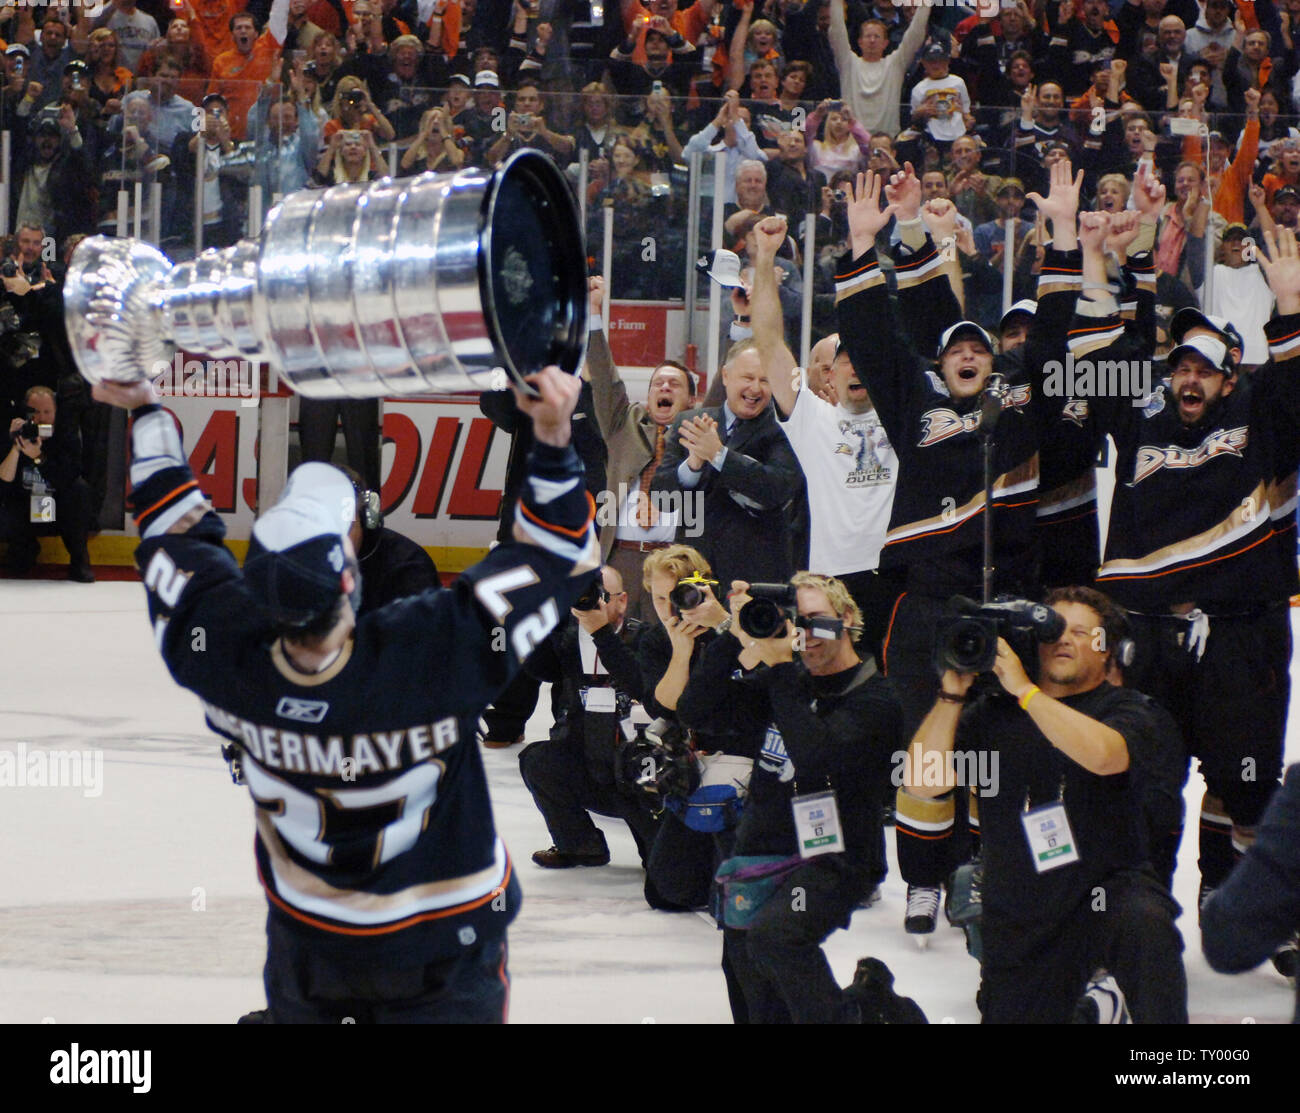 Scott Niedermayer, who led Anaheim to the Stanley Cup in 2007 and